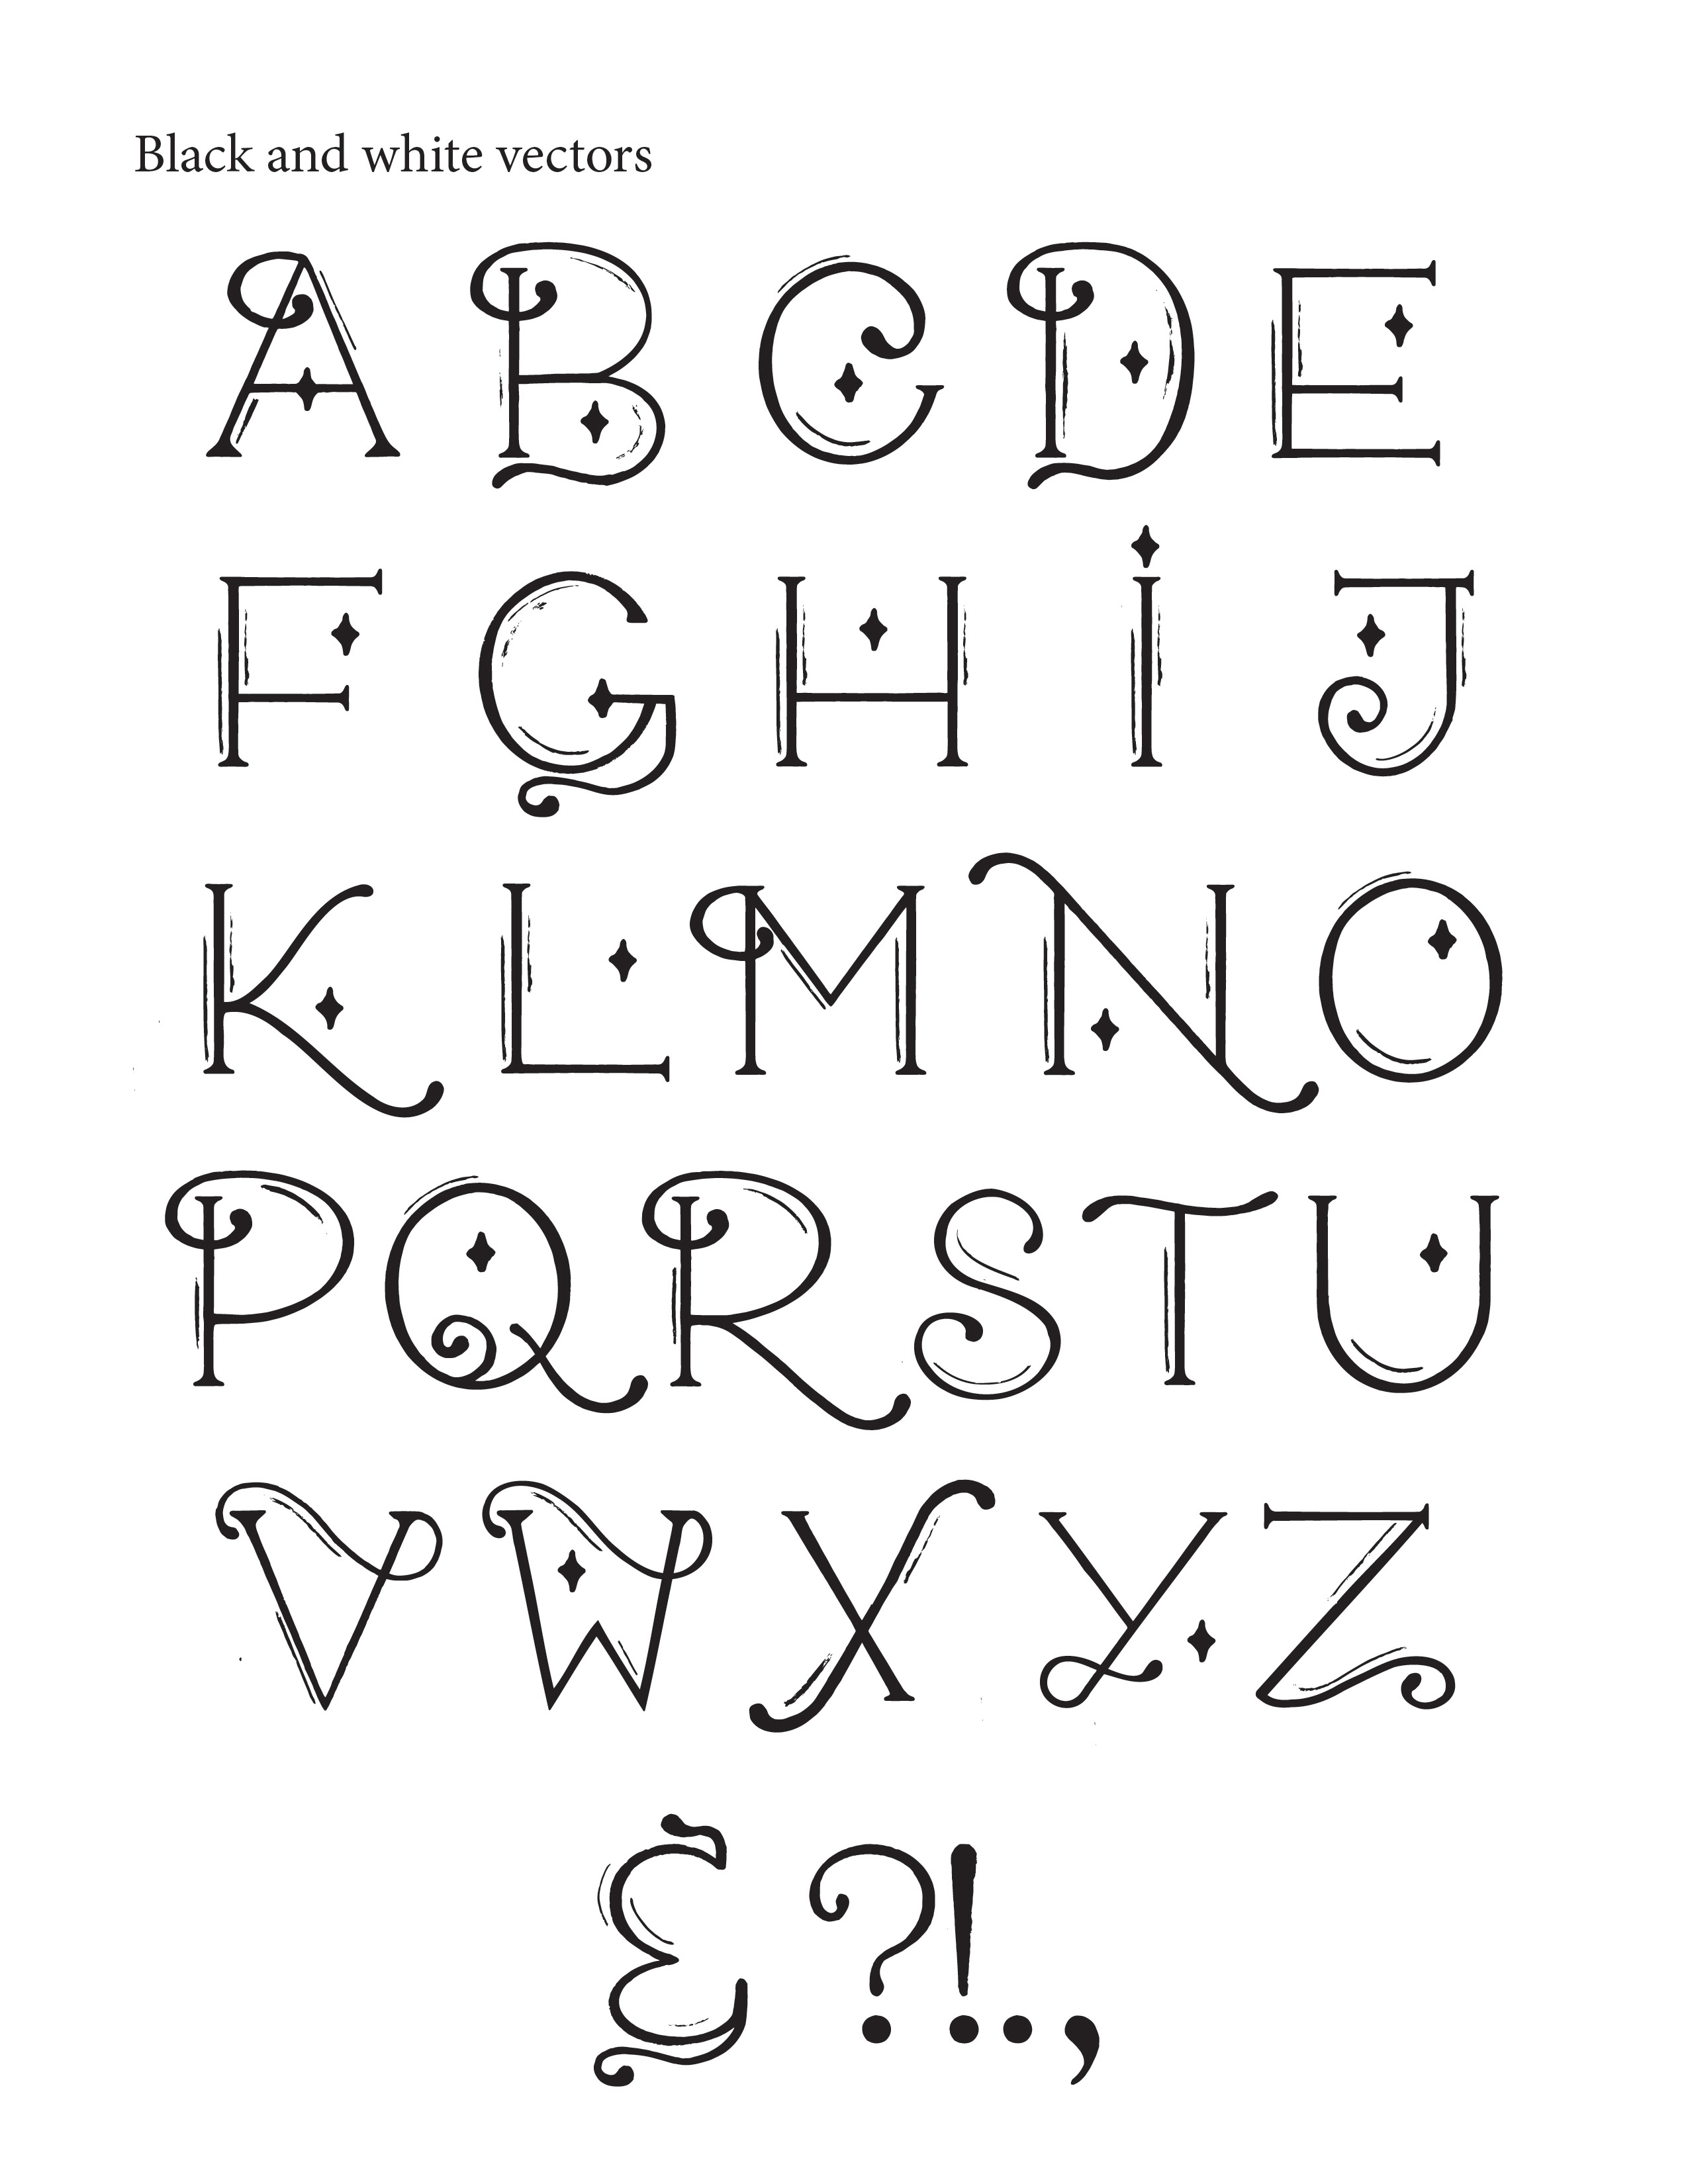 This is an image of letters.